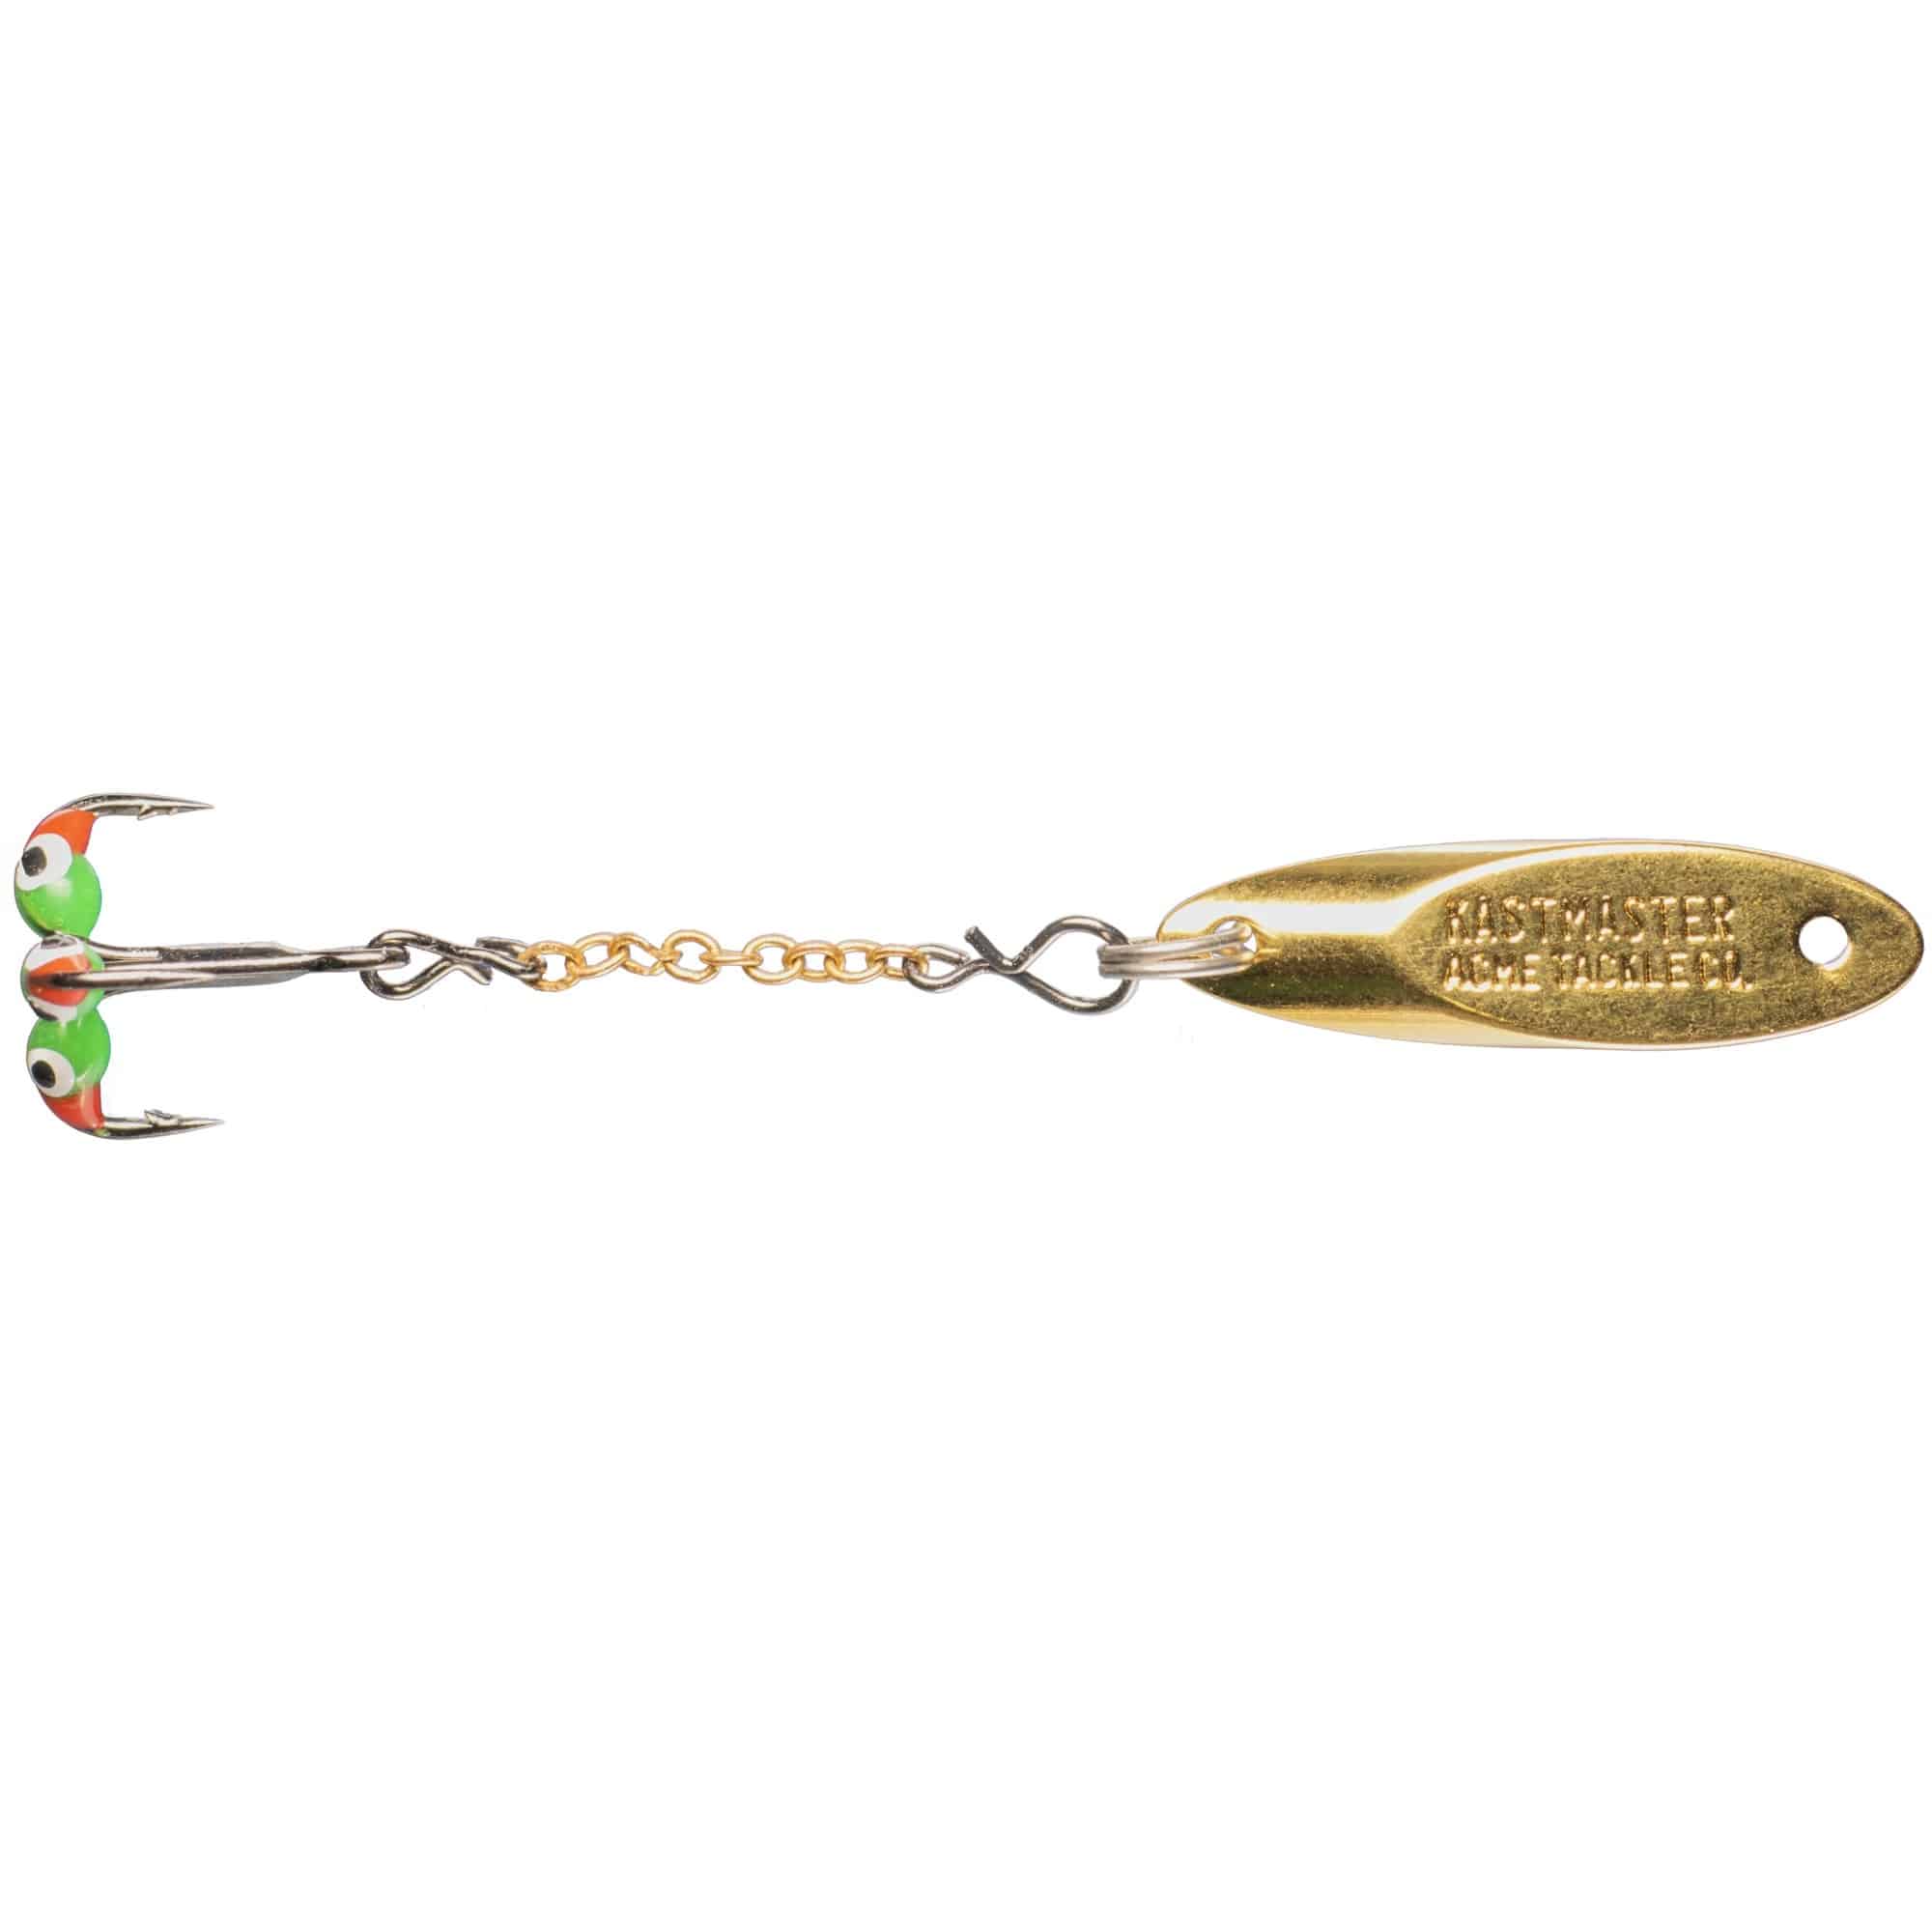 Acme Tackle D-Chain Kastmaster Gold